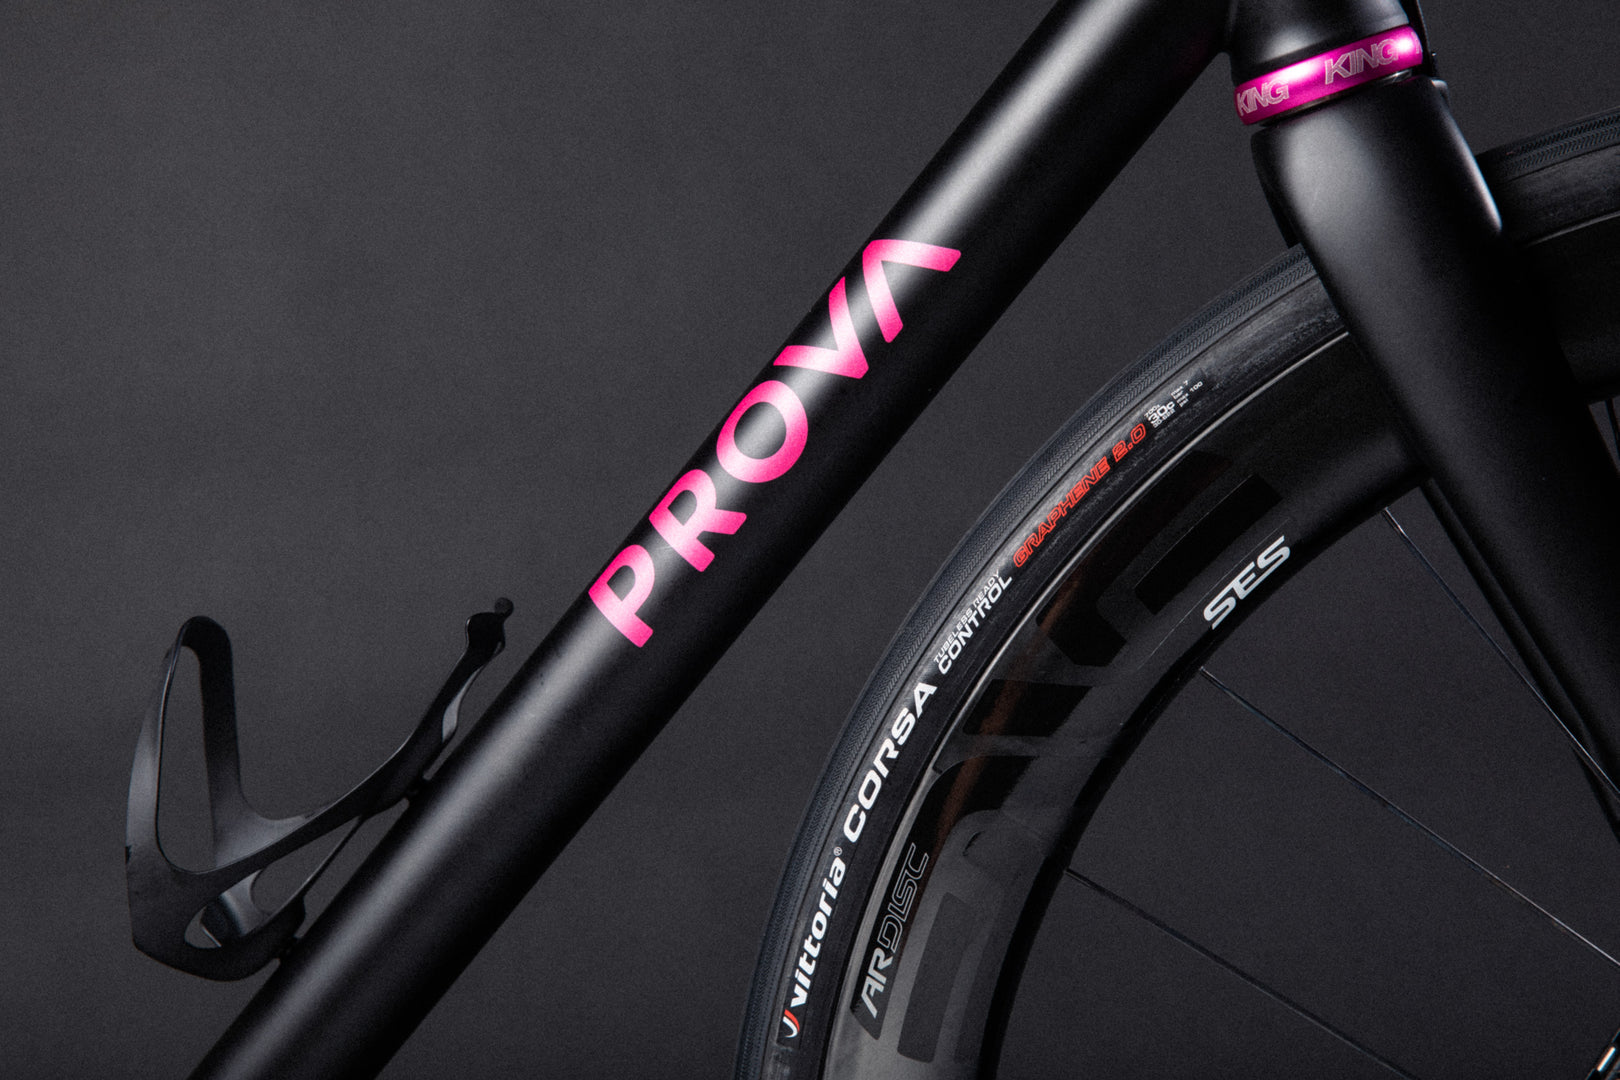 Build Watching: A Black and Pink Prova Speciale